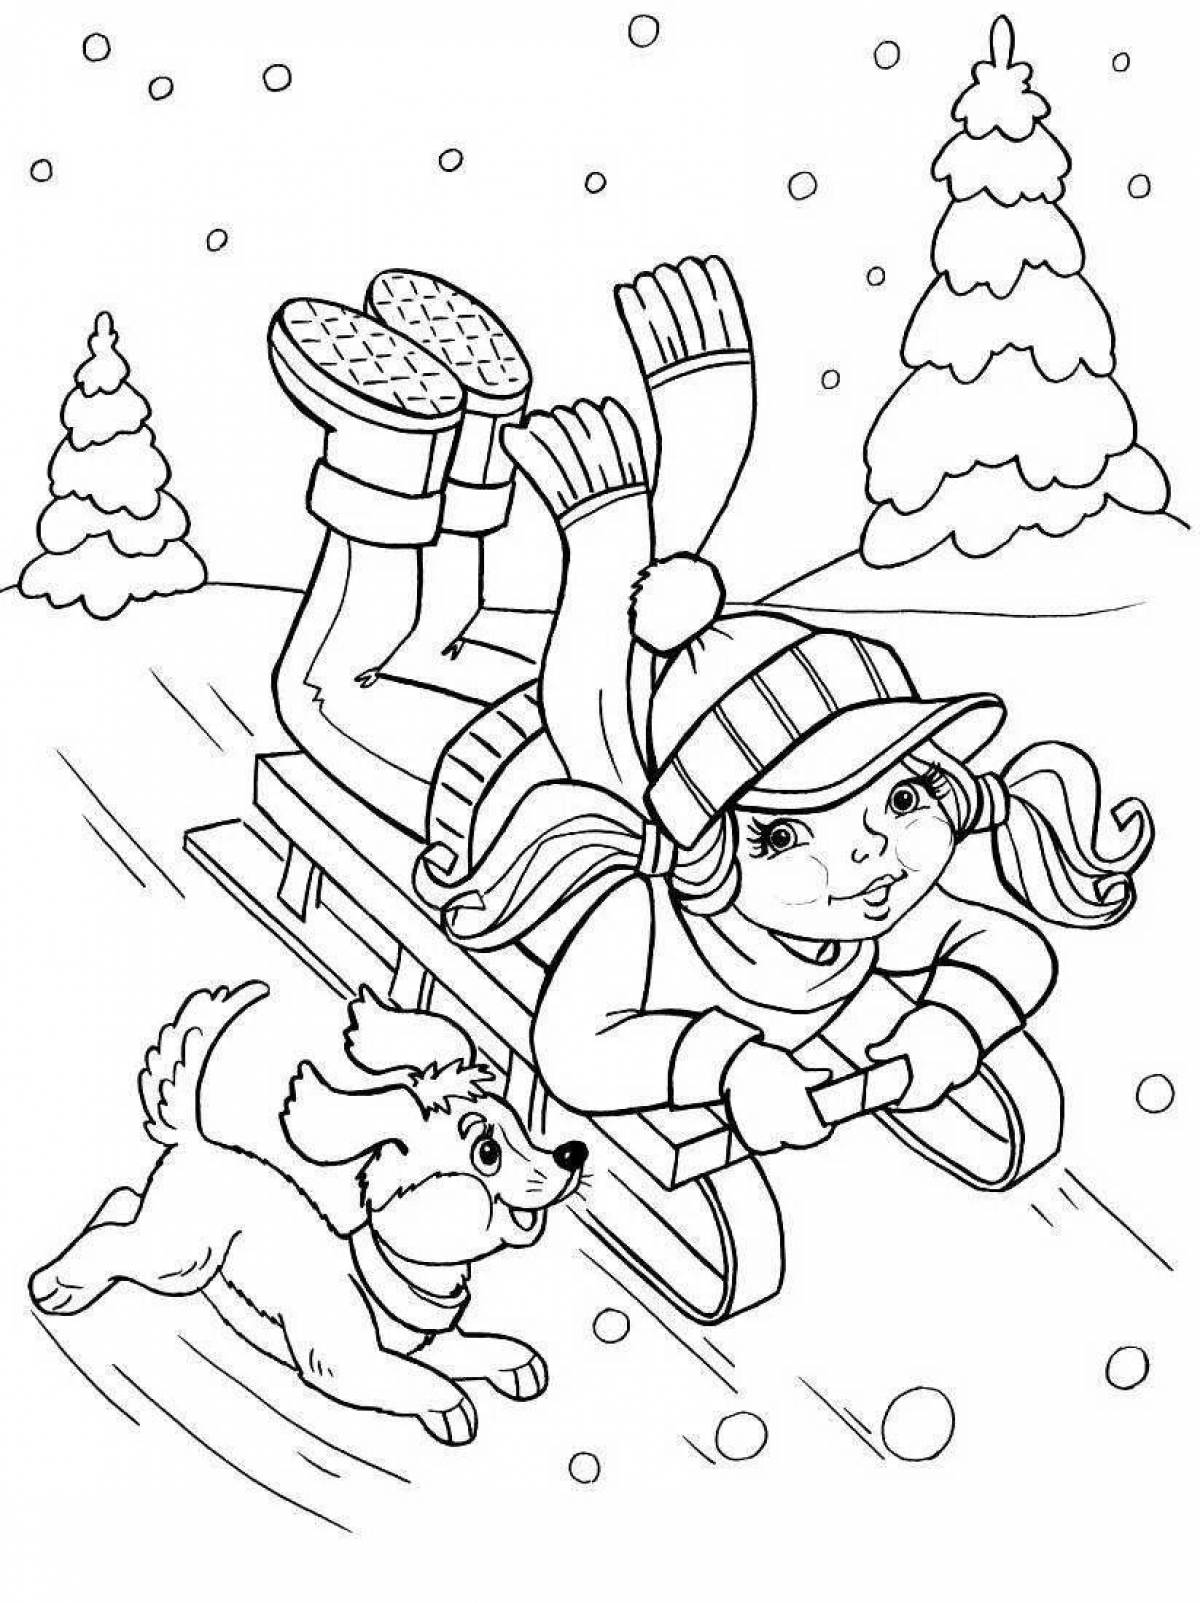 For kids about winter fun #3